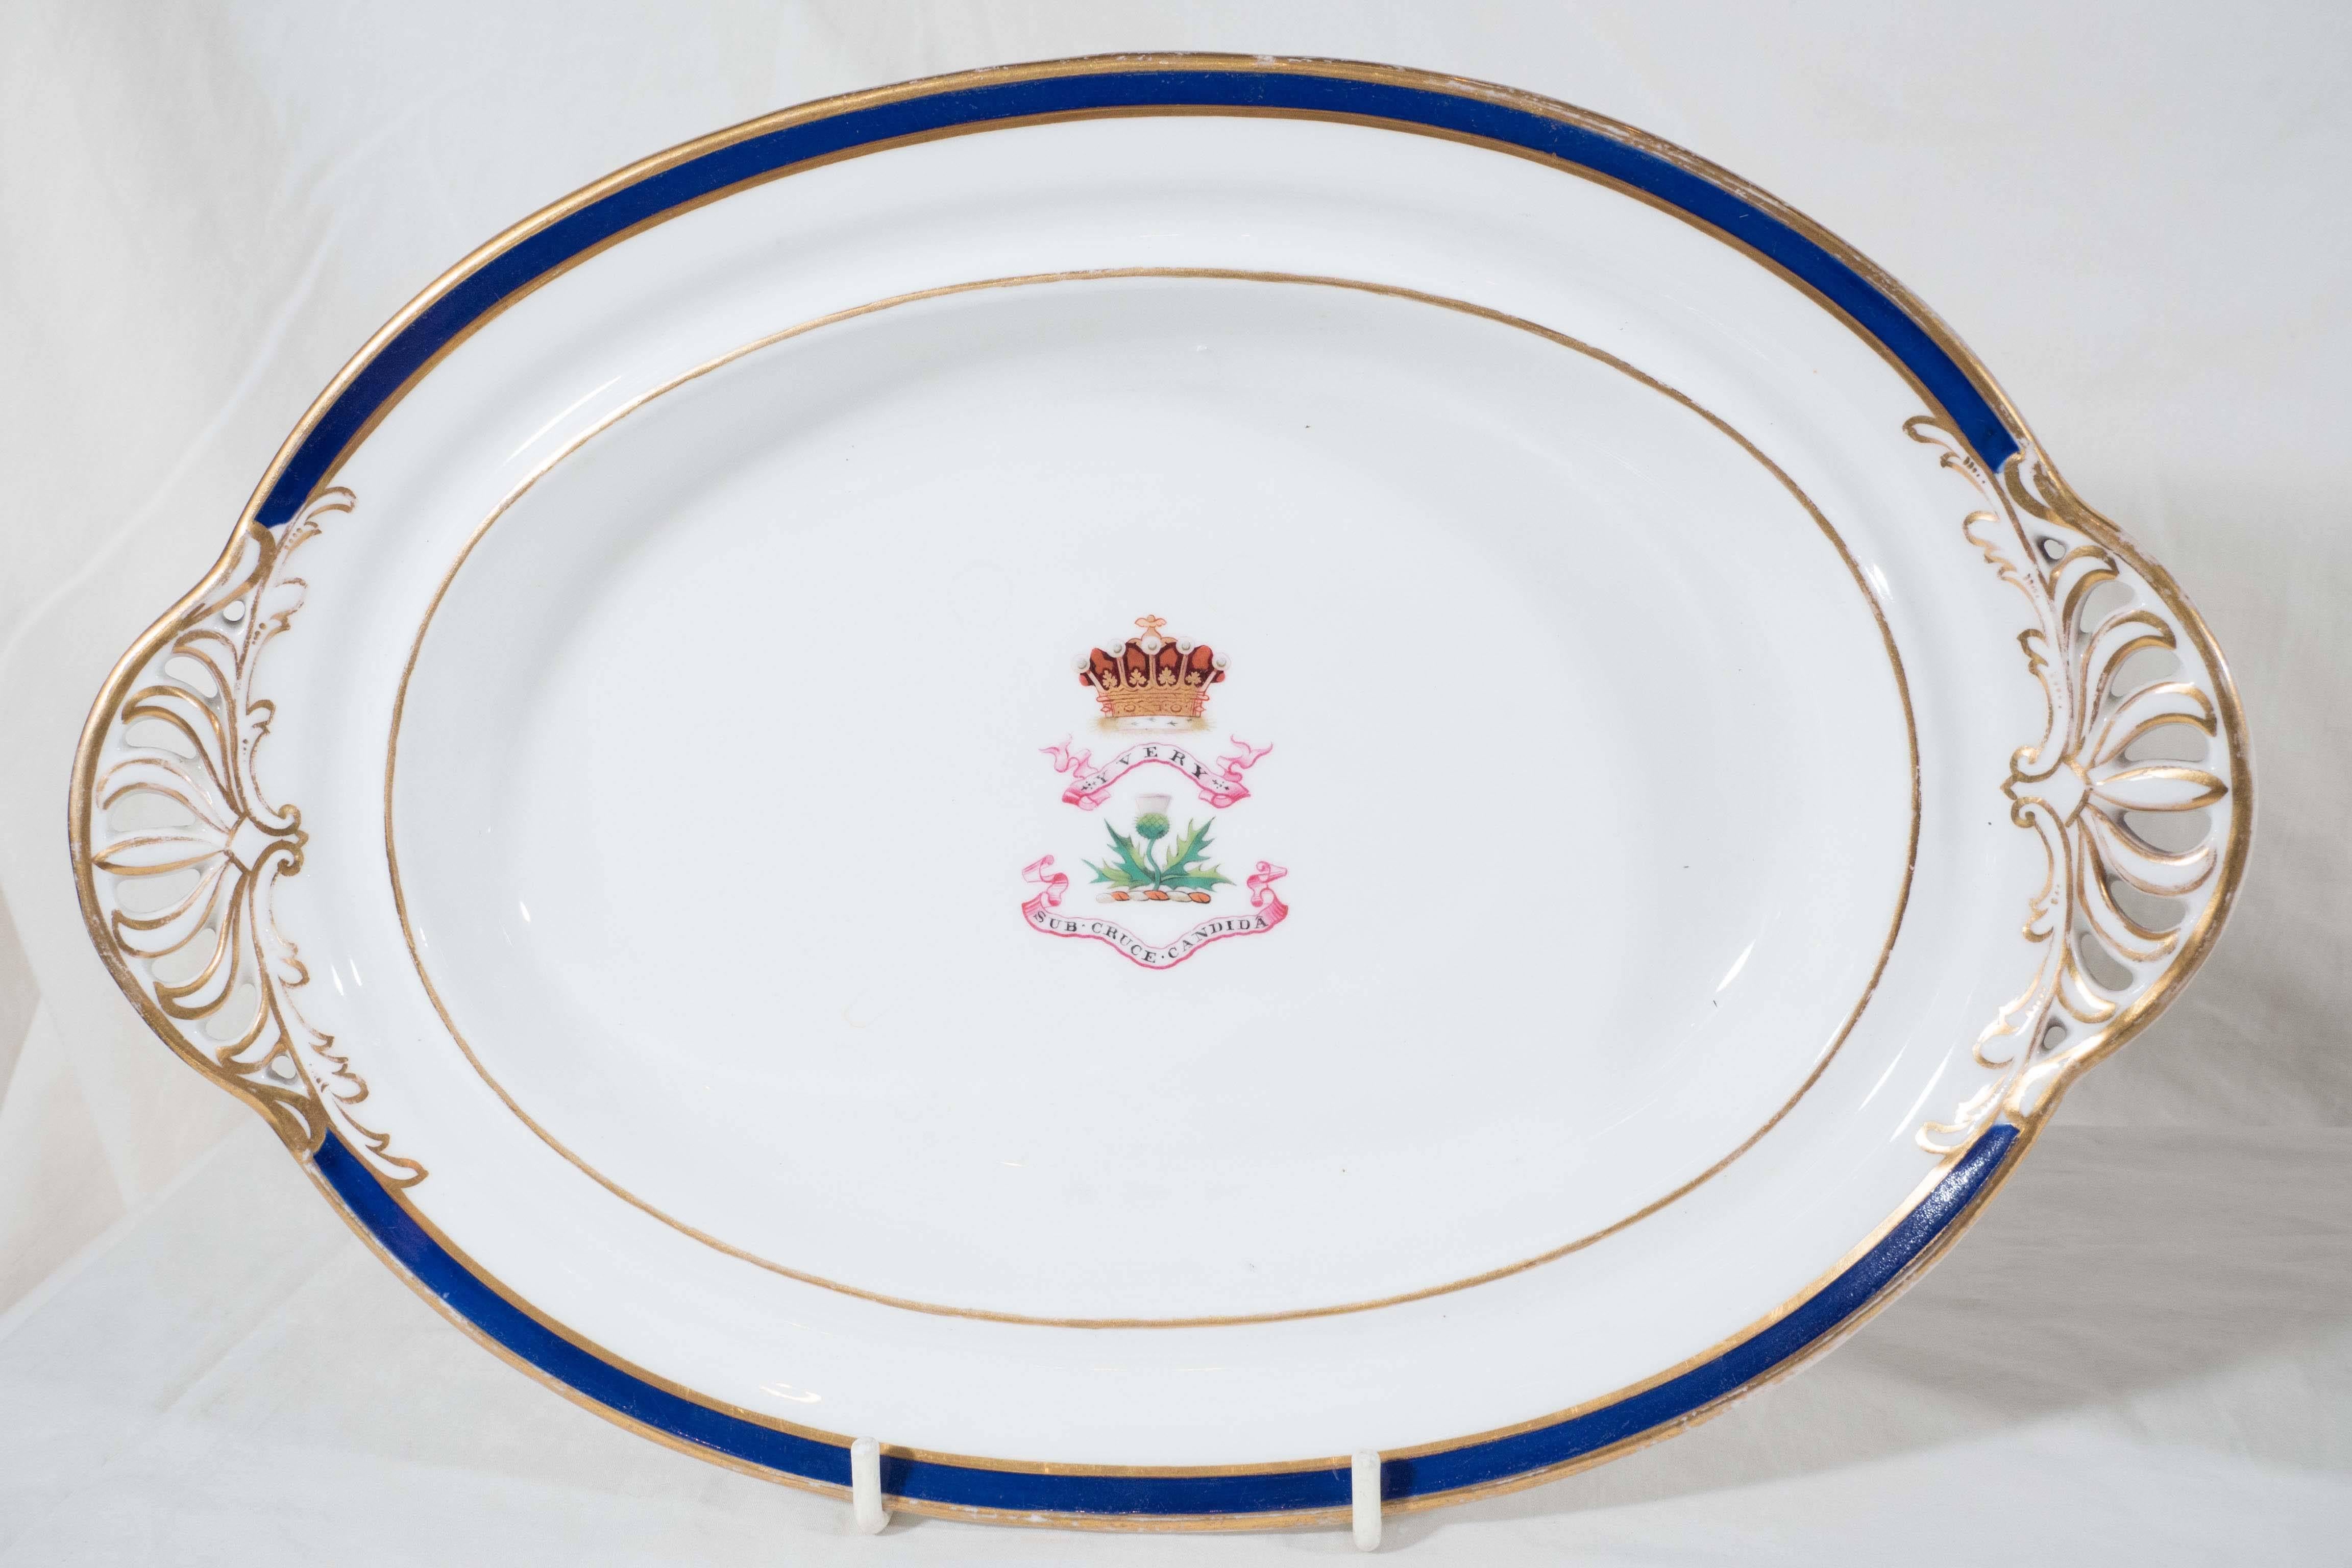 Neoclassical Antique Irish Armorial Dishes with the Arms of the Family of Perceval circa 1870